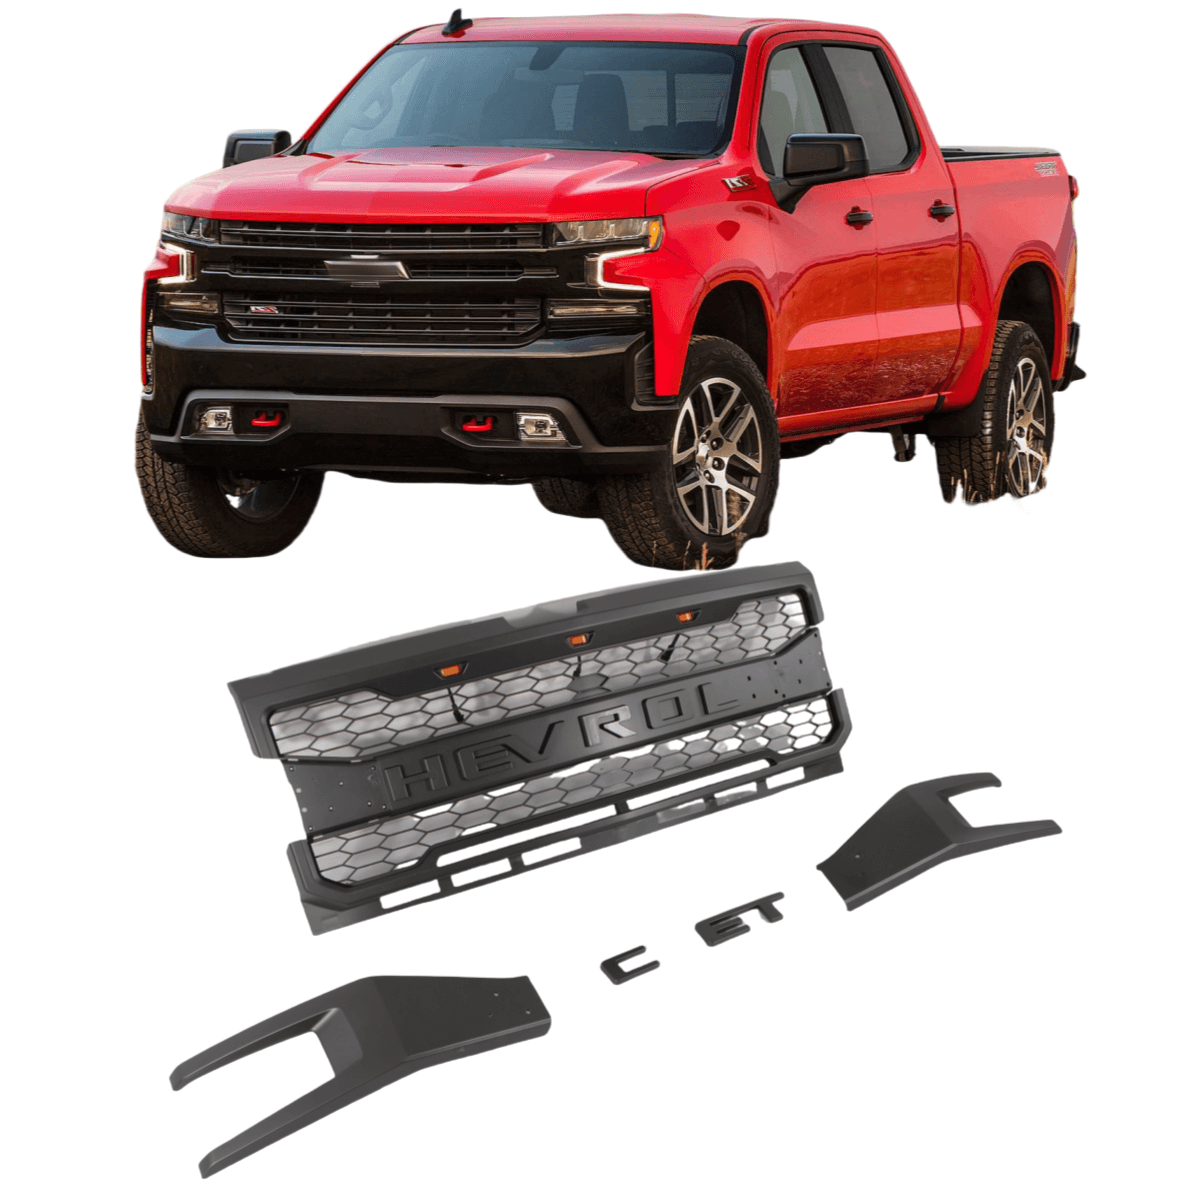 {WildWell}{ Chevrolet Grille}-{ Chevrolet Silverado Grille 2019-2020/4}-Front